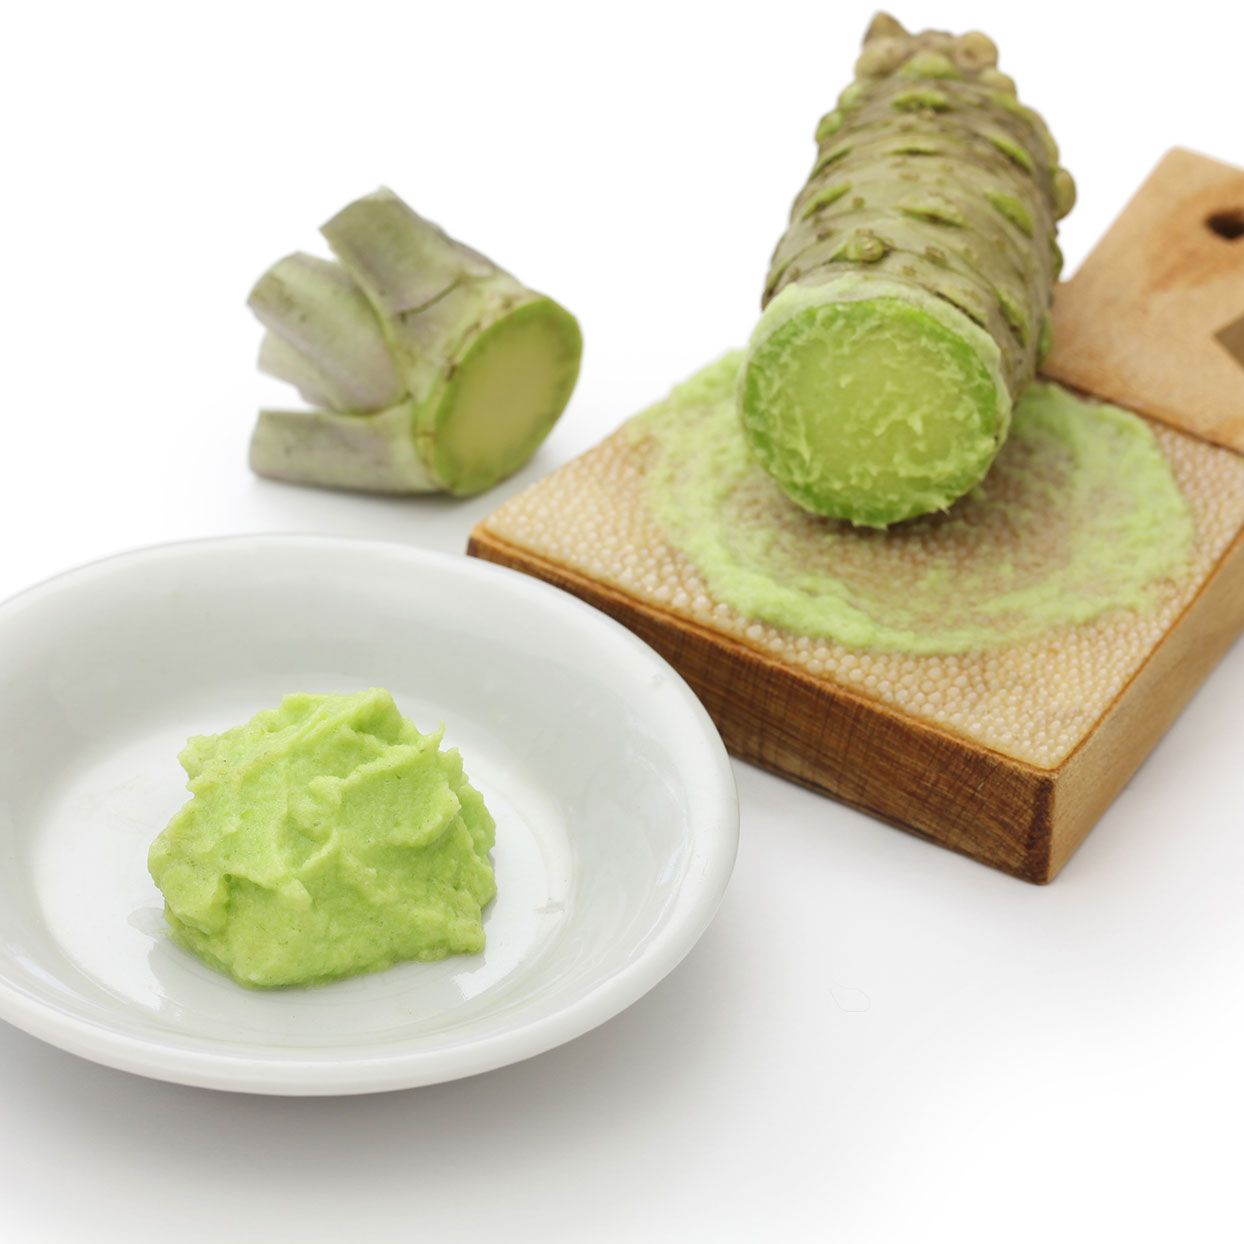 wasabi on a plate